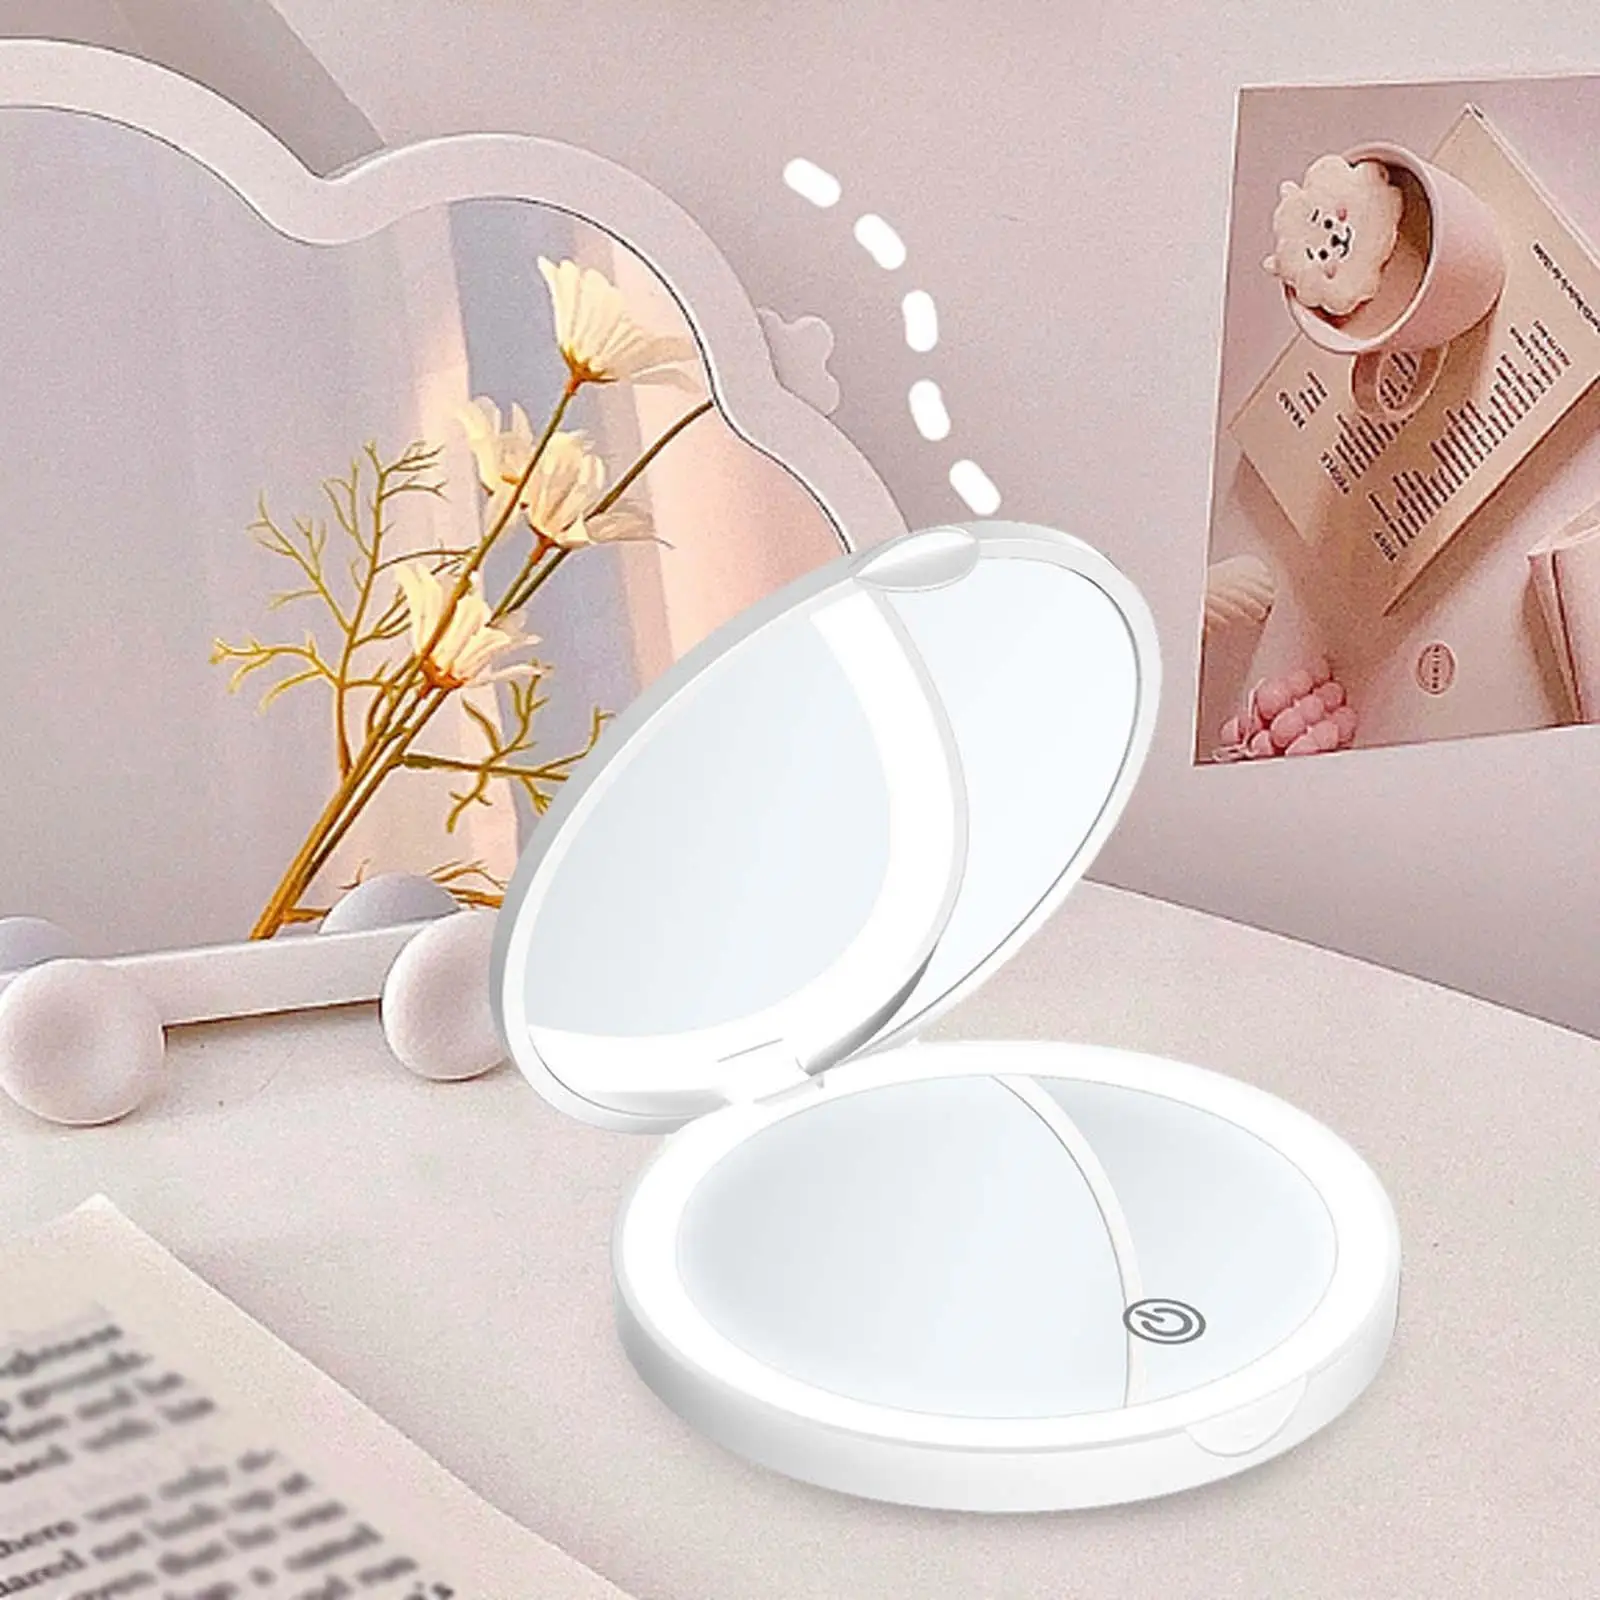 Lighted Travel Mirror Portable 2x Magnification Rechargeable Handheld Makeup Mirror for Travel Handbag Pocket Mother`s Day Gifts